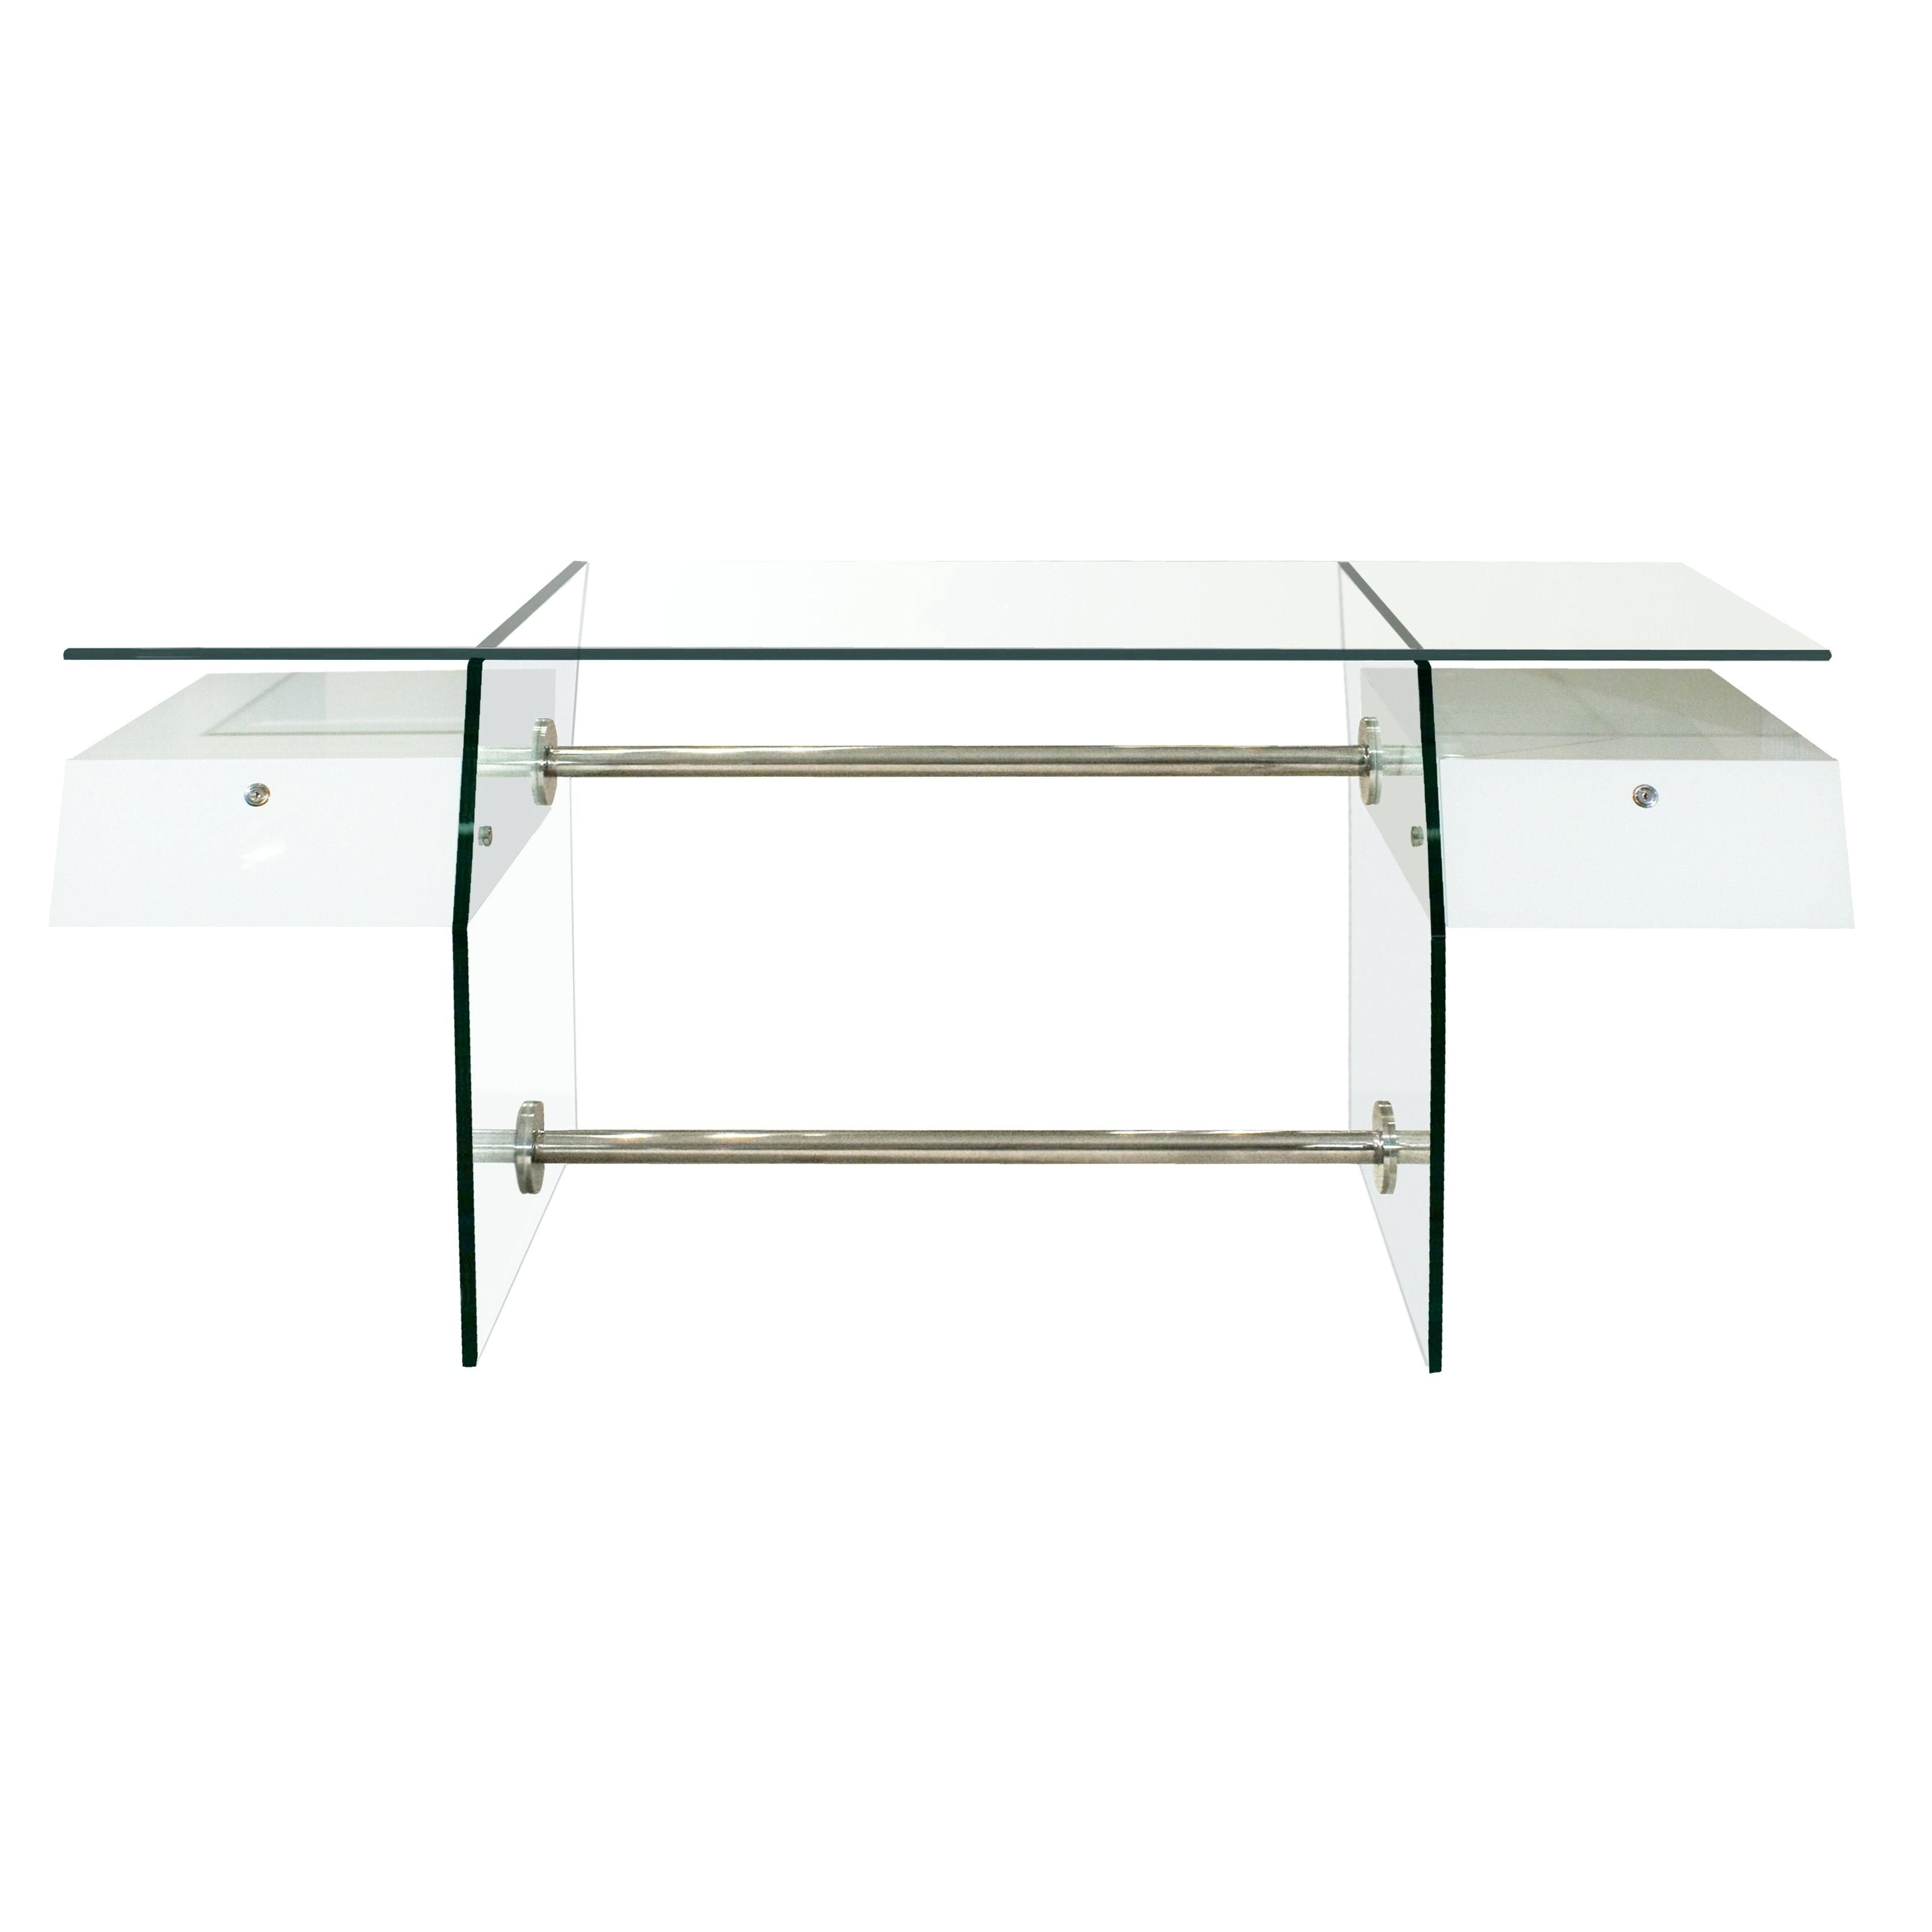 Sharelle Verona Dining Table Pertaining To Most Popular Abhinav Credenzas (View 17 of 20)